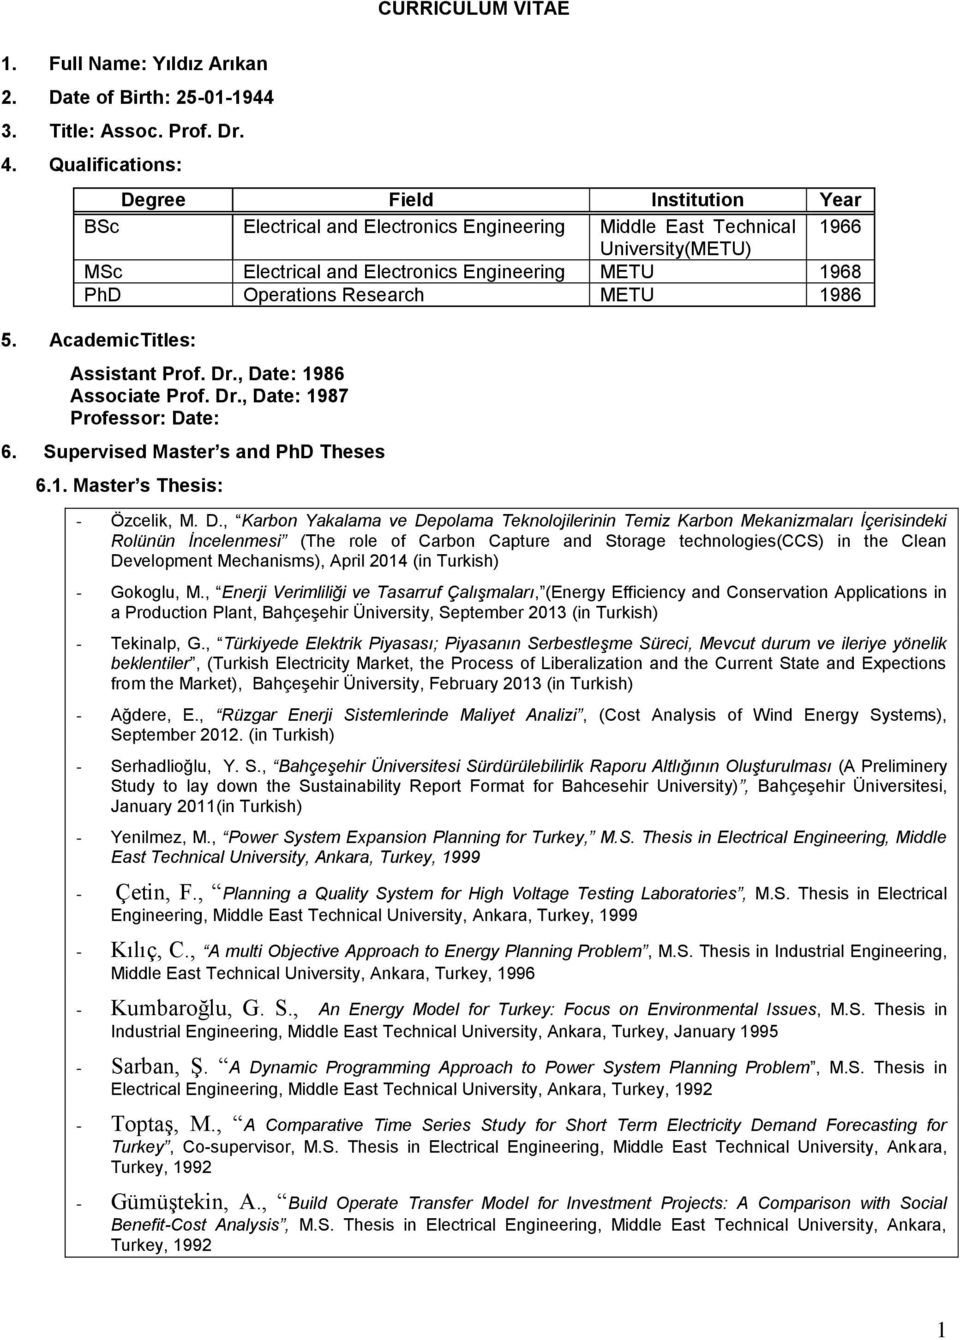 Operations Research METU 1986 5. AcademicTitles: Assistant Prof. Dr., Date: 1986 Associate Prof. Dr., Date: 1987 Professor: Date: 6. Supervised Master s and PhD Theses 6.1. Master s Thesis: - Özcelik, M.